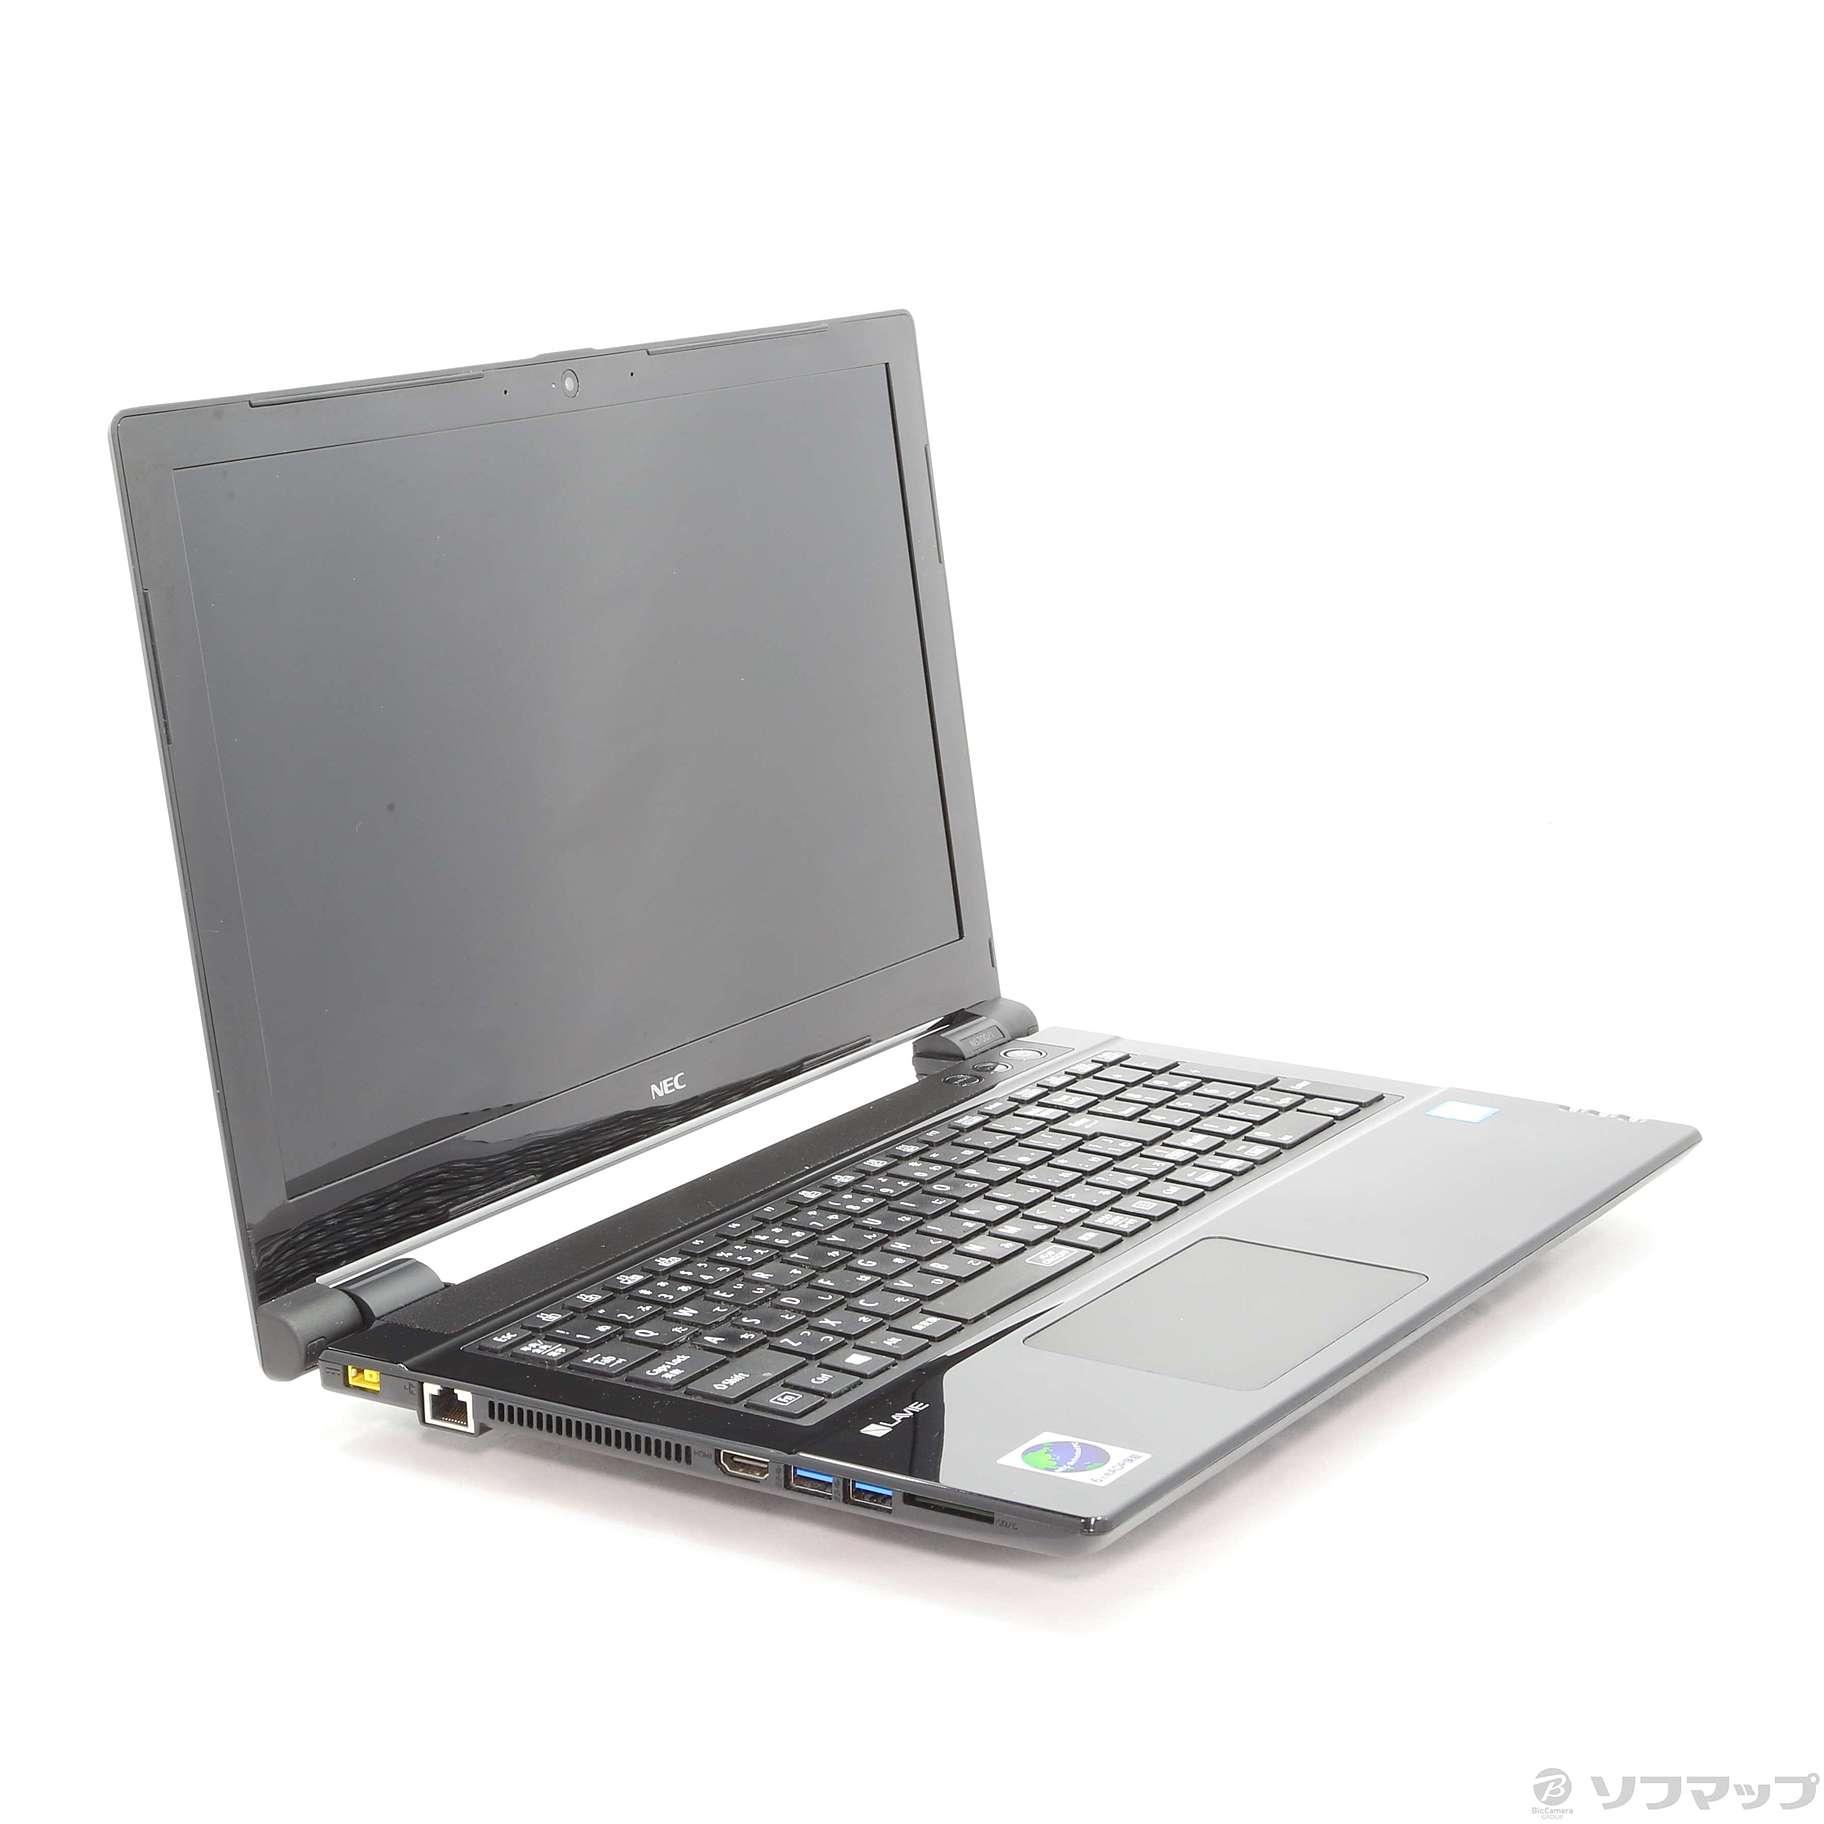 LaVie Note Standard PC-NS700JAB スターリーブラック 〔NEC Refreshed PC〕 〔Windows 10〕  〔Office付〕 ≪メーカー保証あり≫